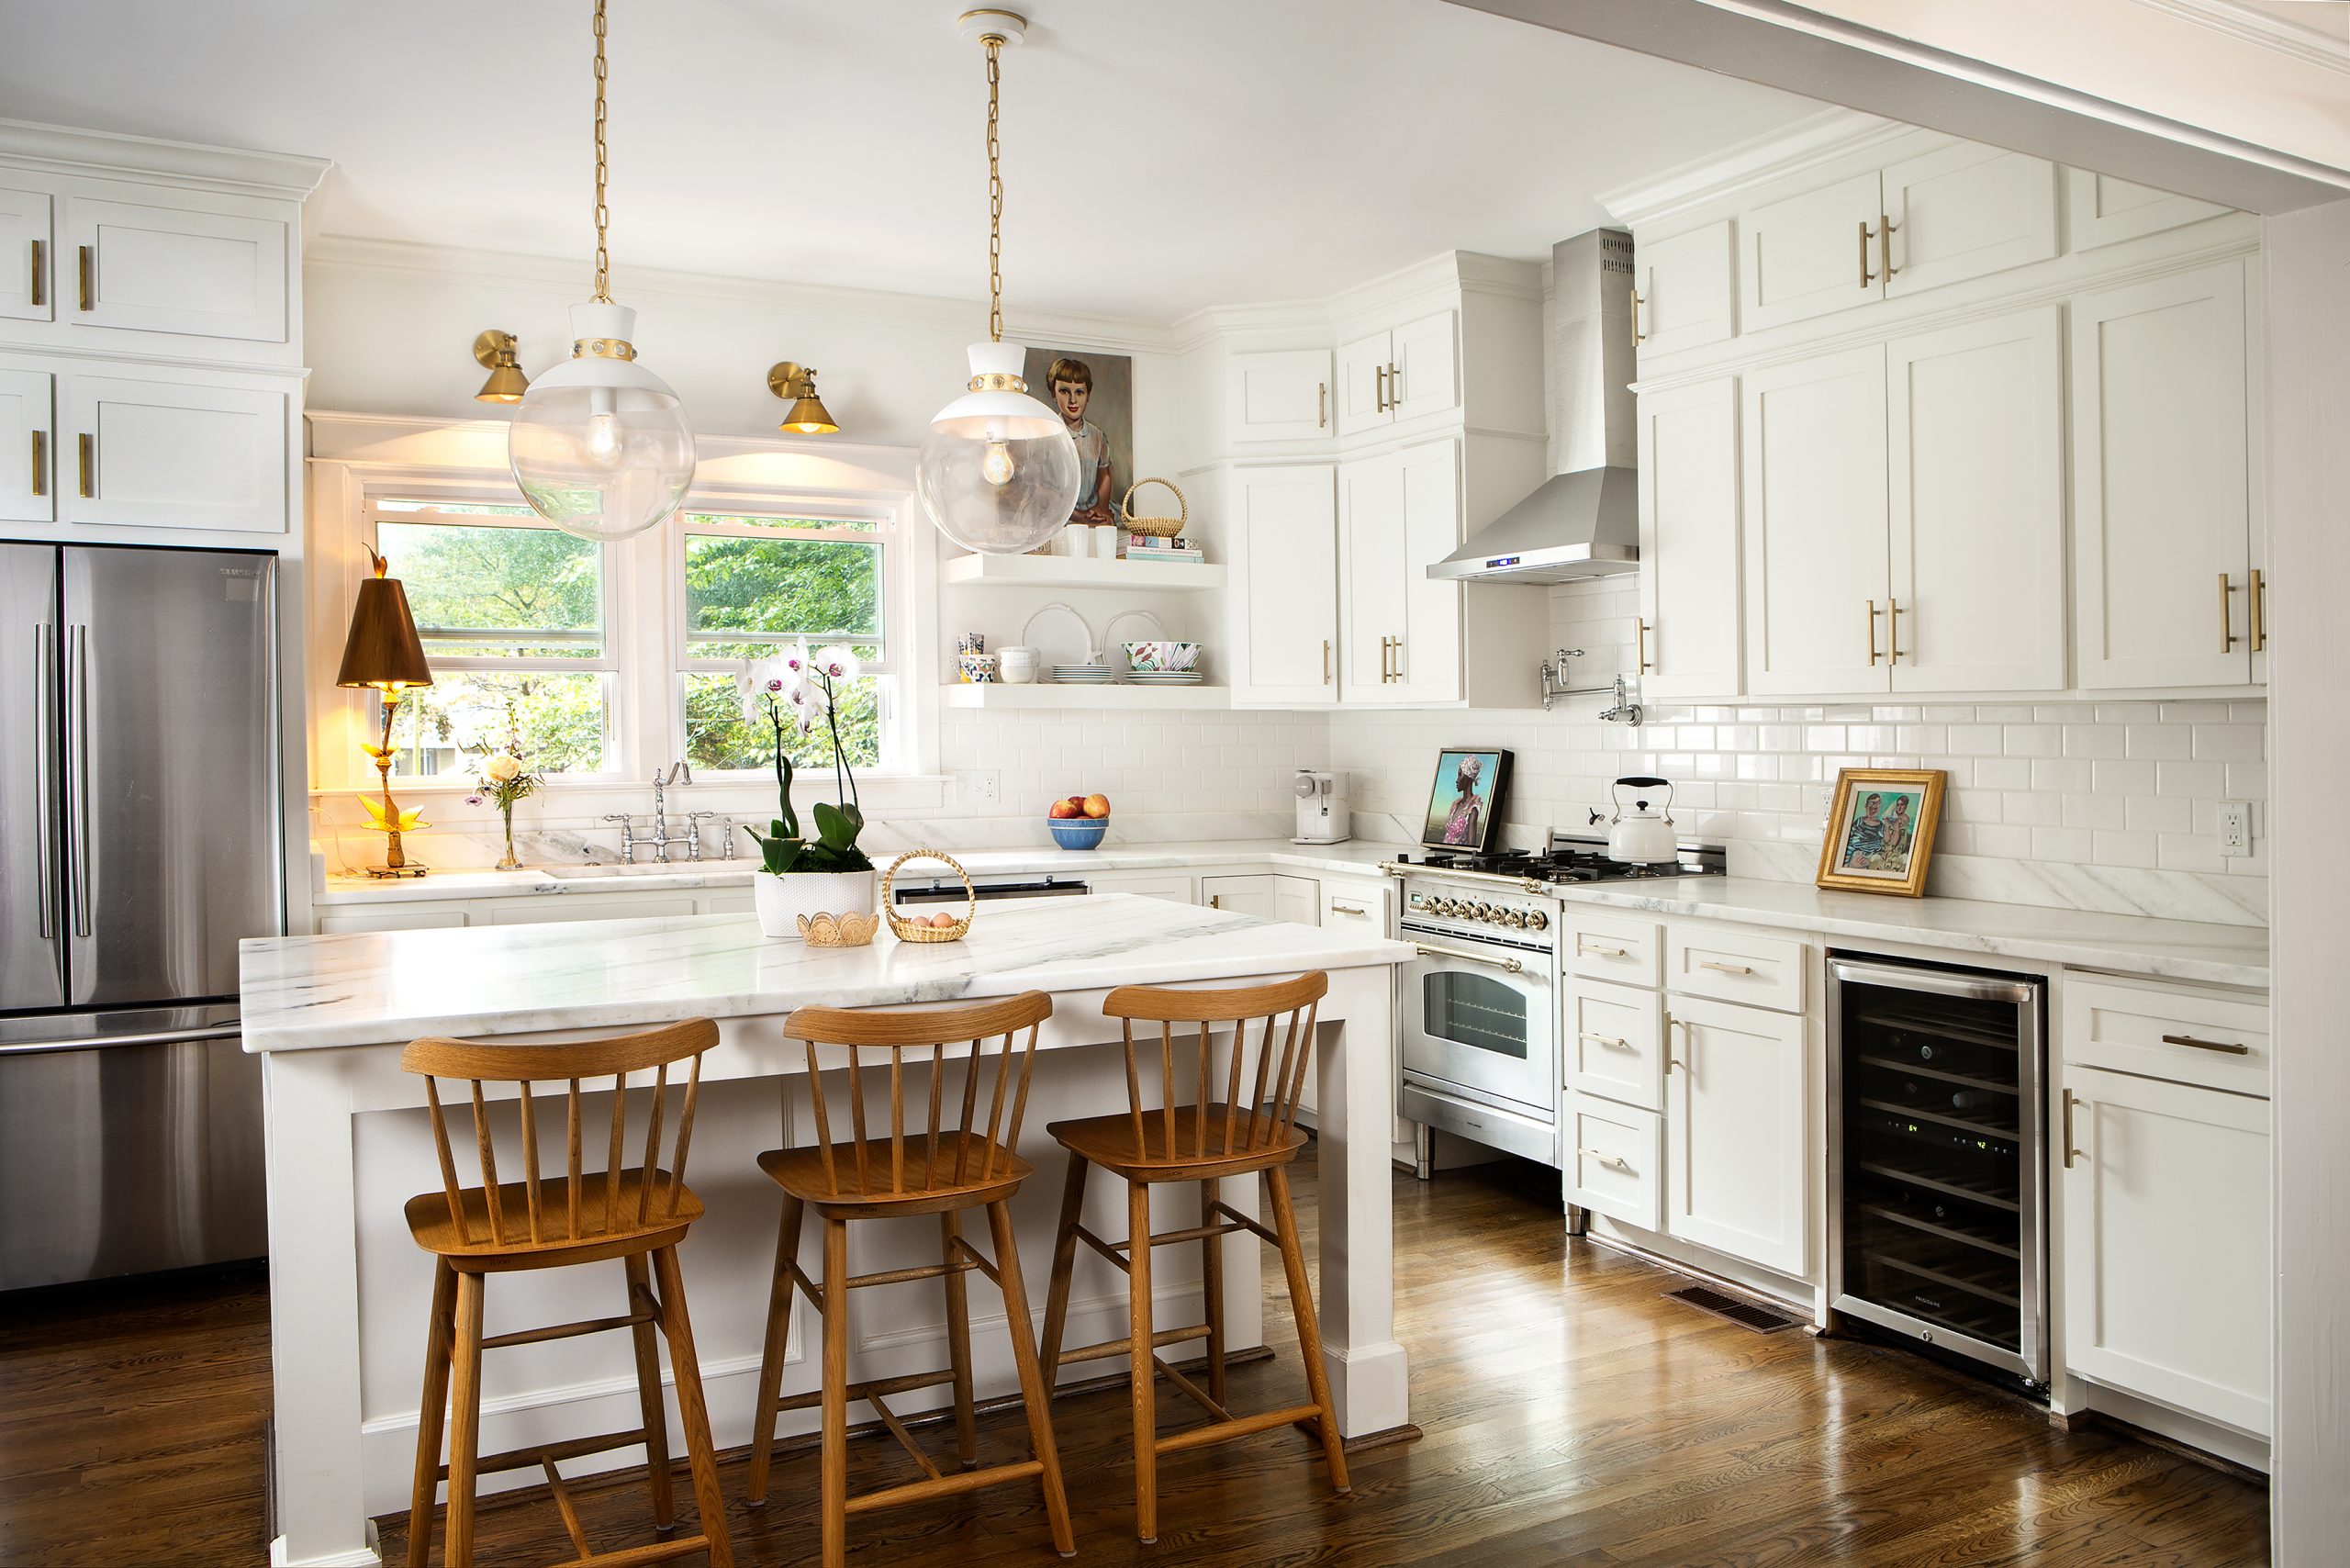 Preserving history and their budget, AnnaBelle used existing cabinetry in the kitchen, replacing doors and hardware. Art and lighting, along with the stainless steel and brass Italian range by Hallman, are beautiful accents.